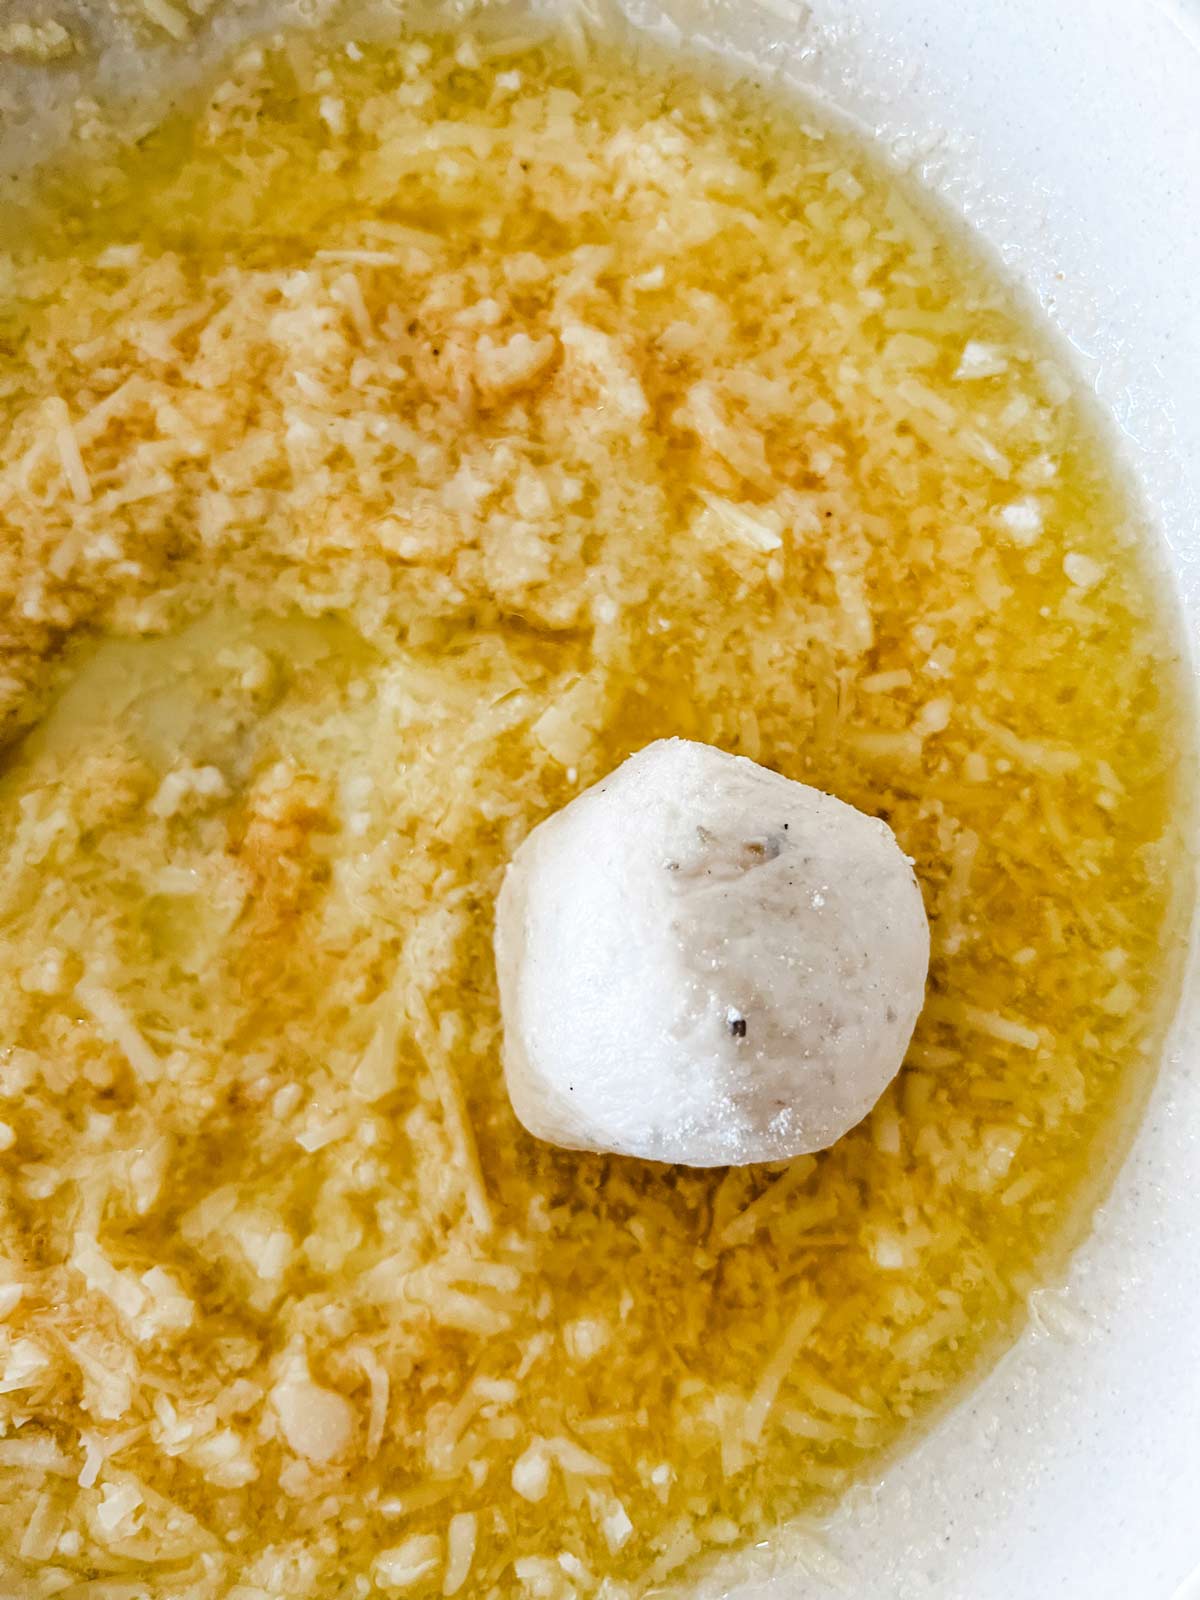 A ball of bread dough being coated in a garlic parmesan mixture.